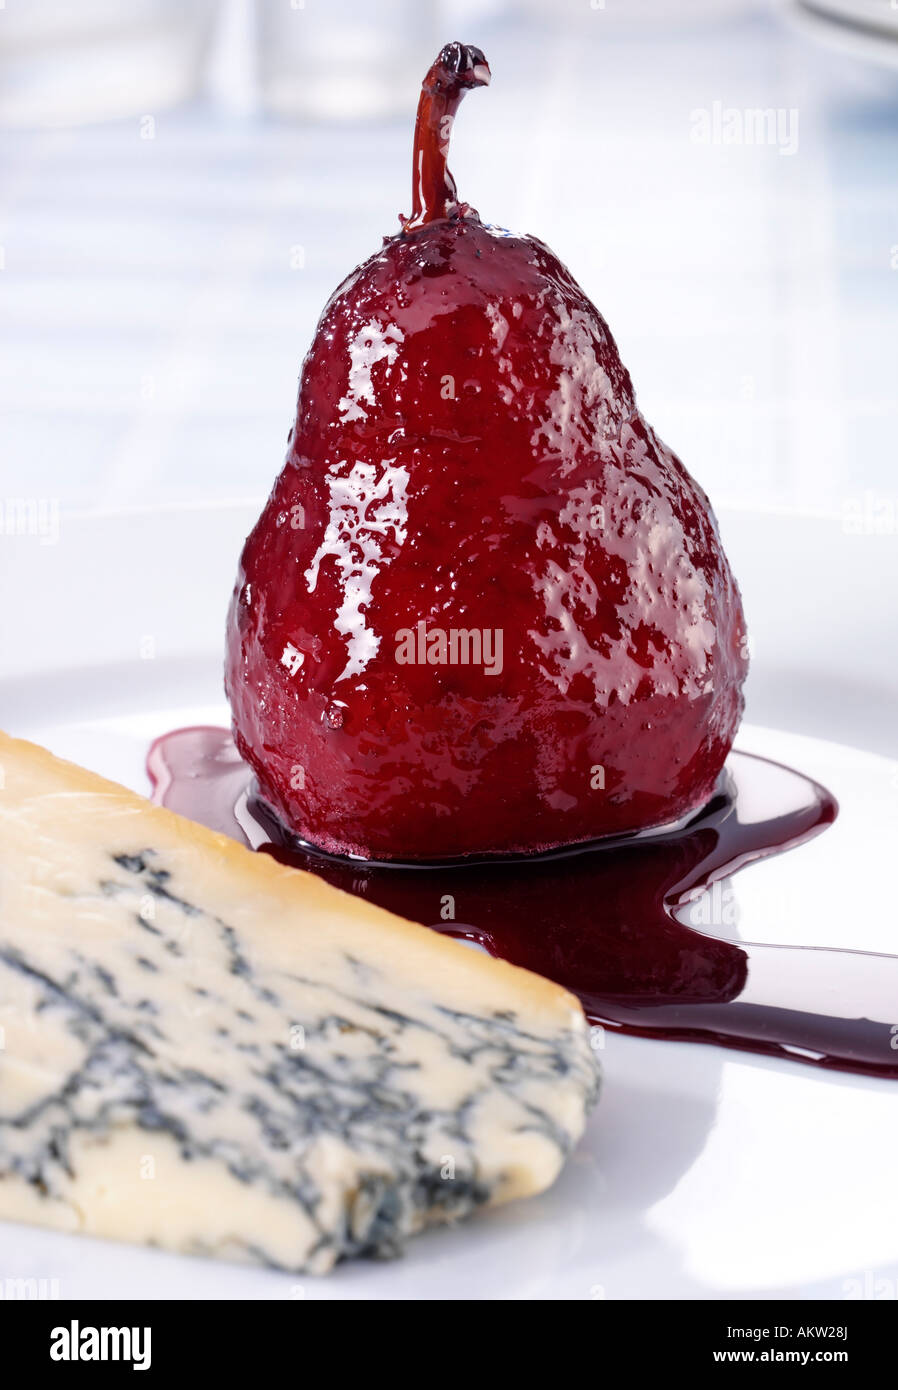 PEAR WITH RED WINE SAUCE Stock Photo